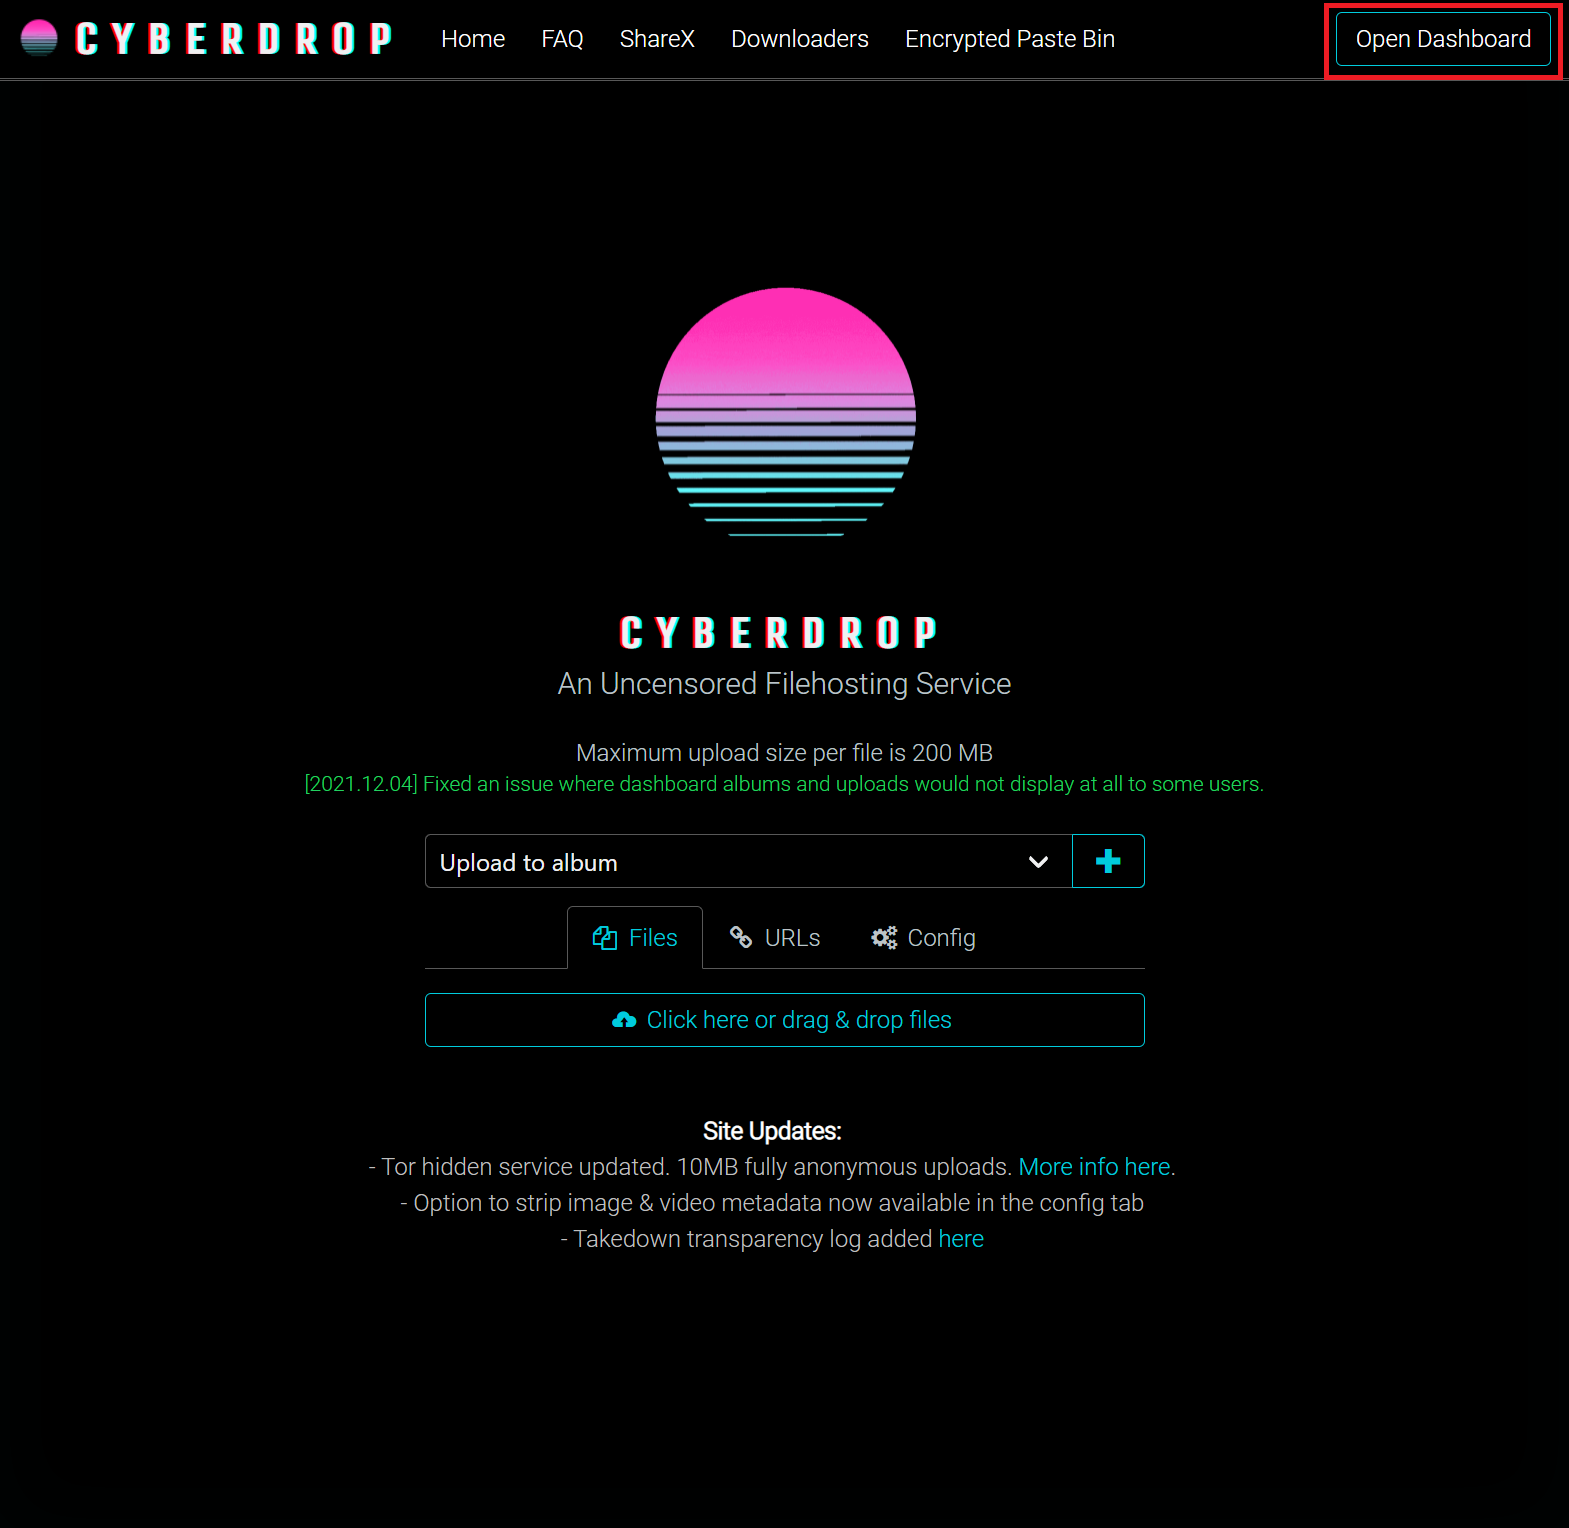 Cyberdrop-Dashboard-Button.png